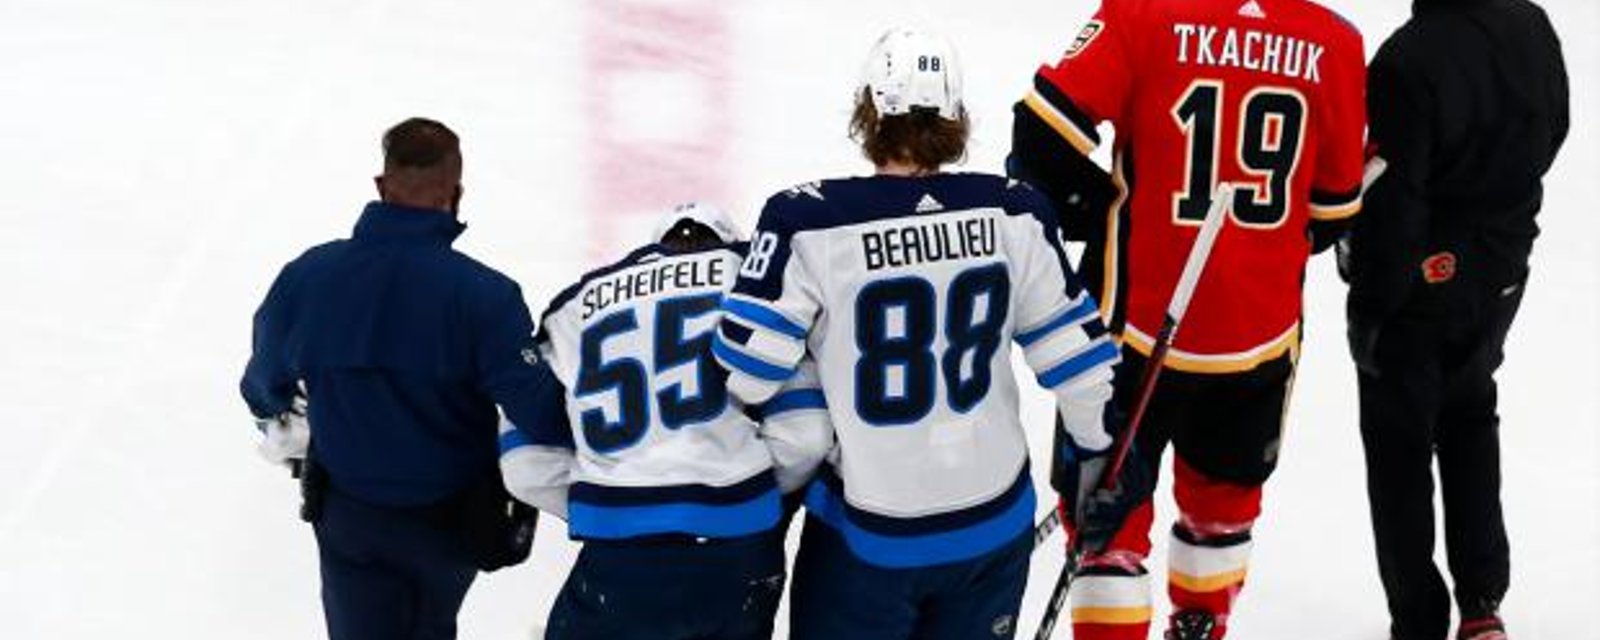 Tkachuk reached out to Scheifele to talk about the Jets forward’s scary injury! 